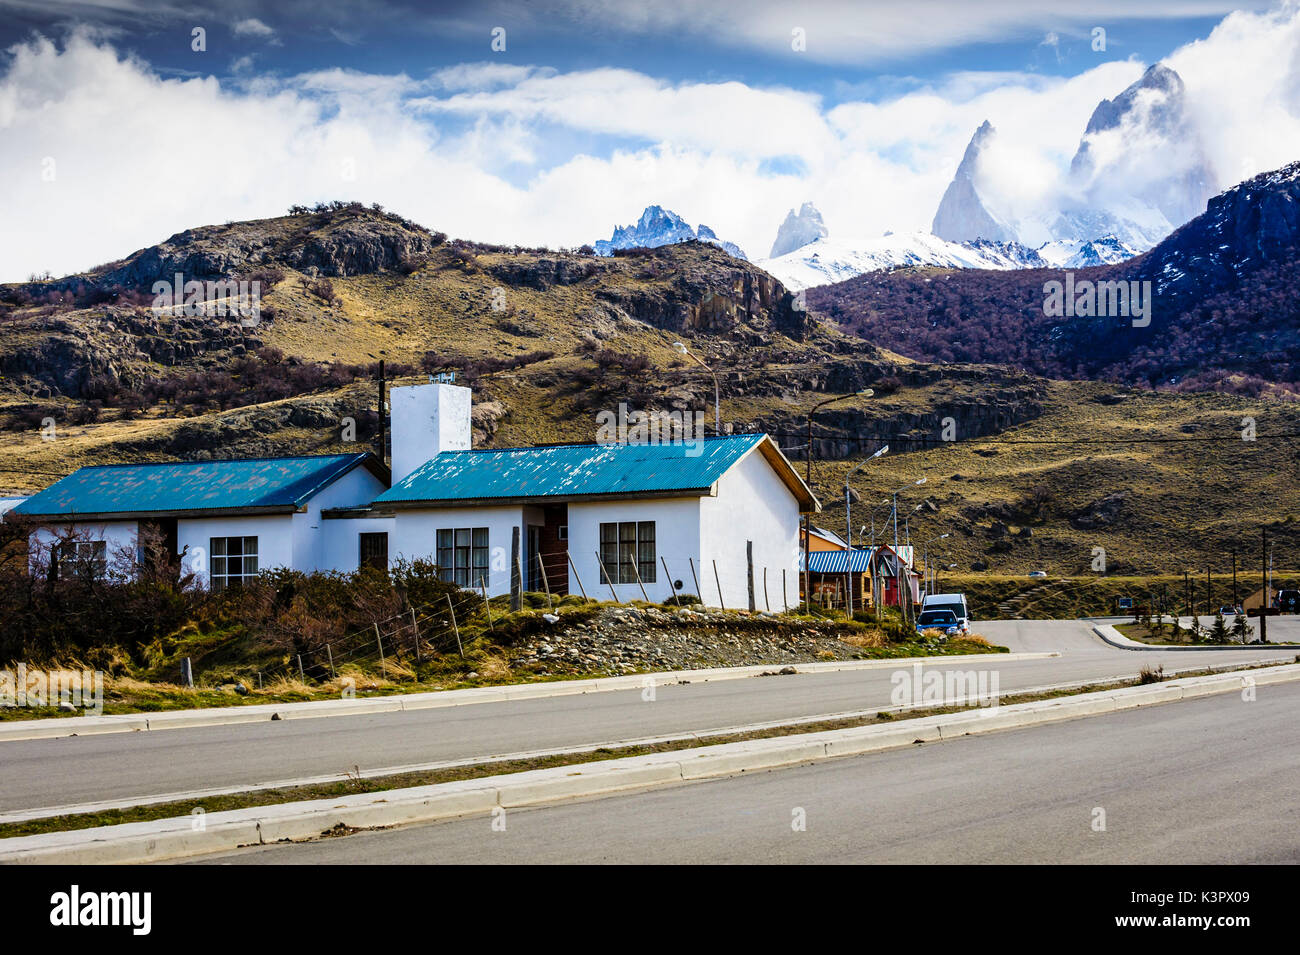 El Chalten, Santa Cruz Province, Glacier National Park, Patagonia, Argentina, South America. The little village with the Fitz Roy Mountain in background. Stock Photo